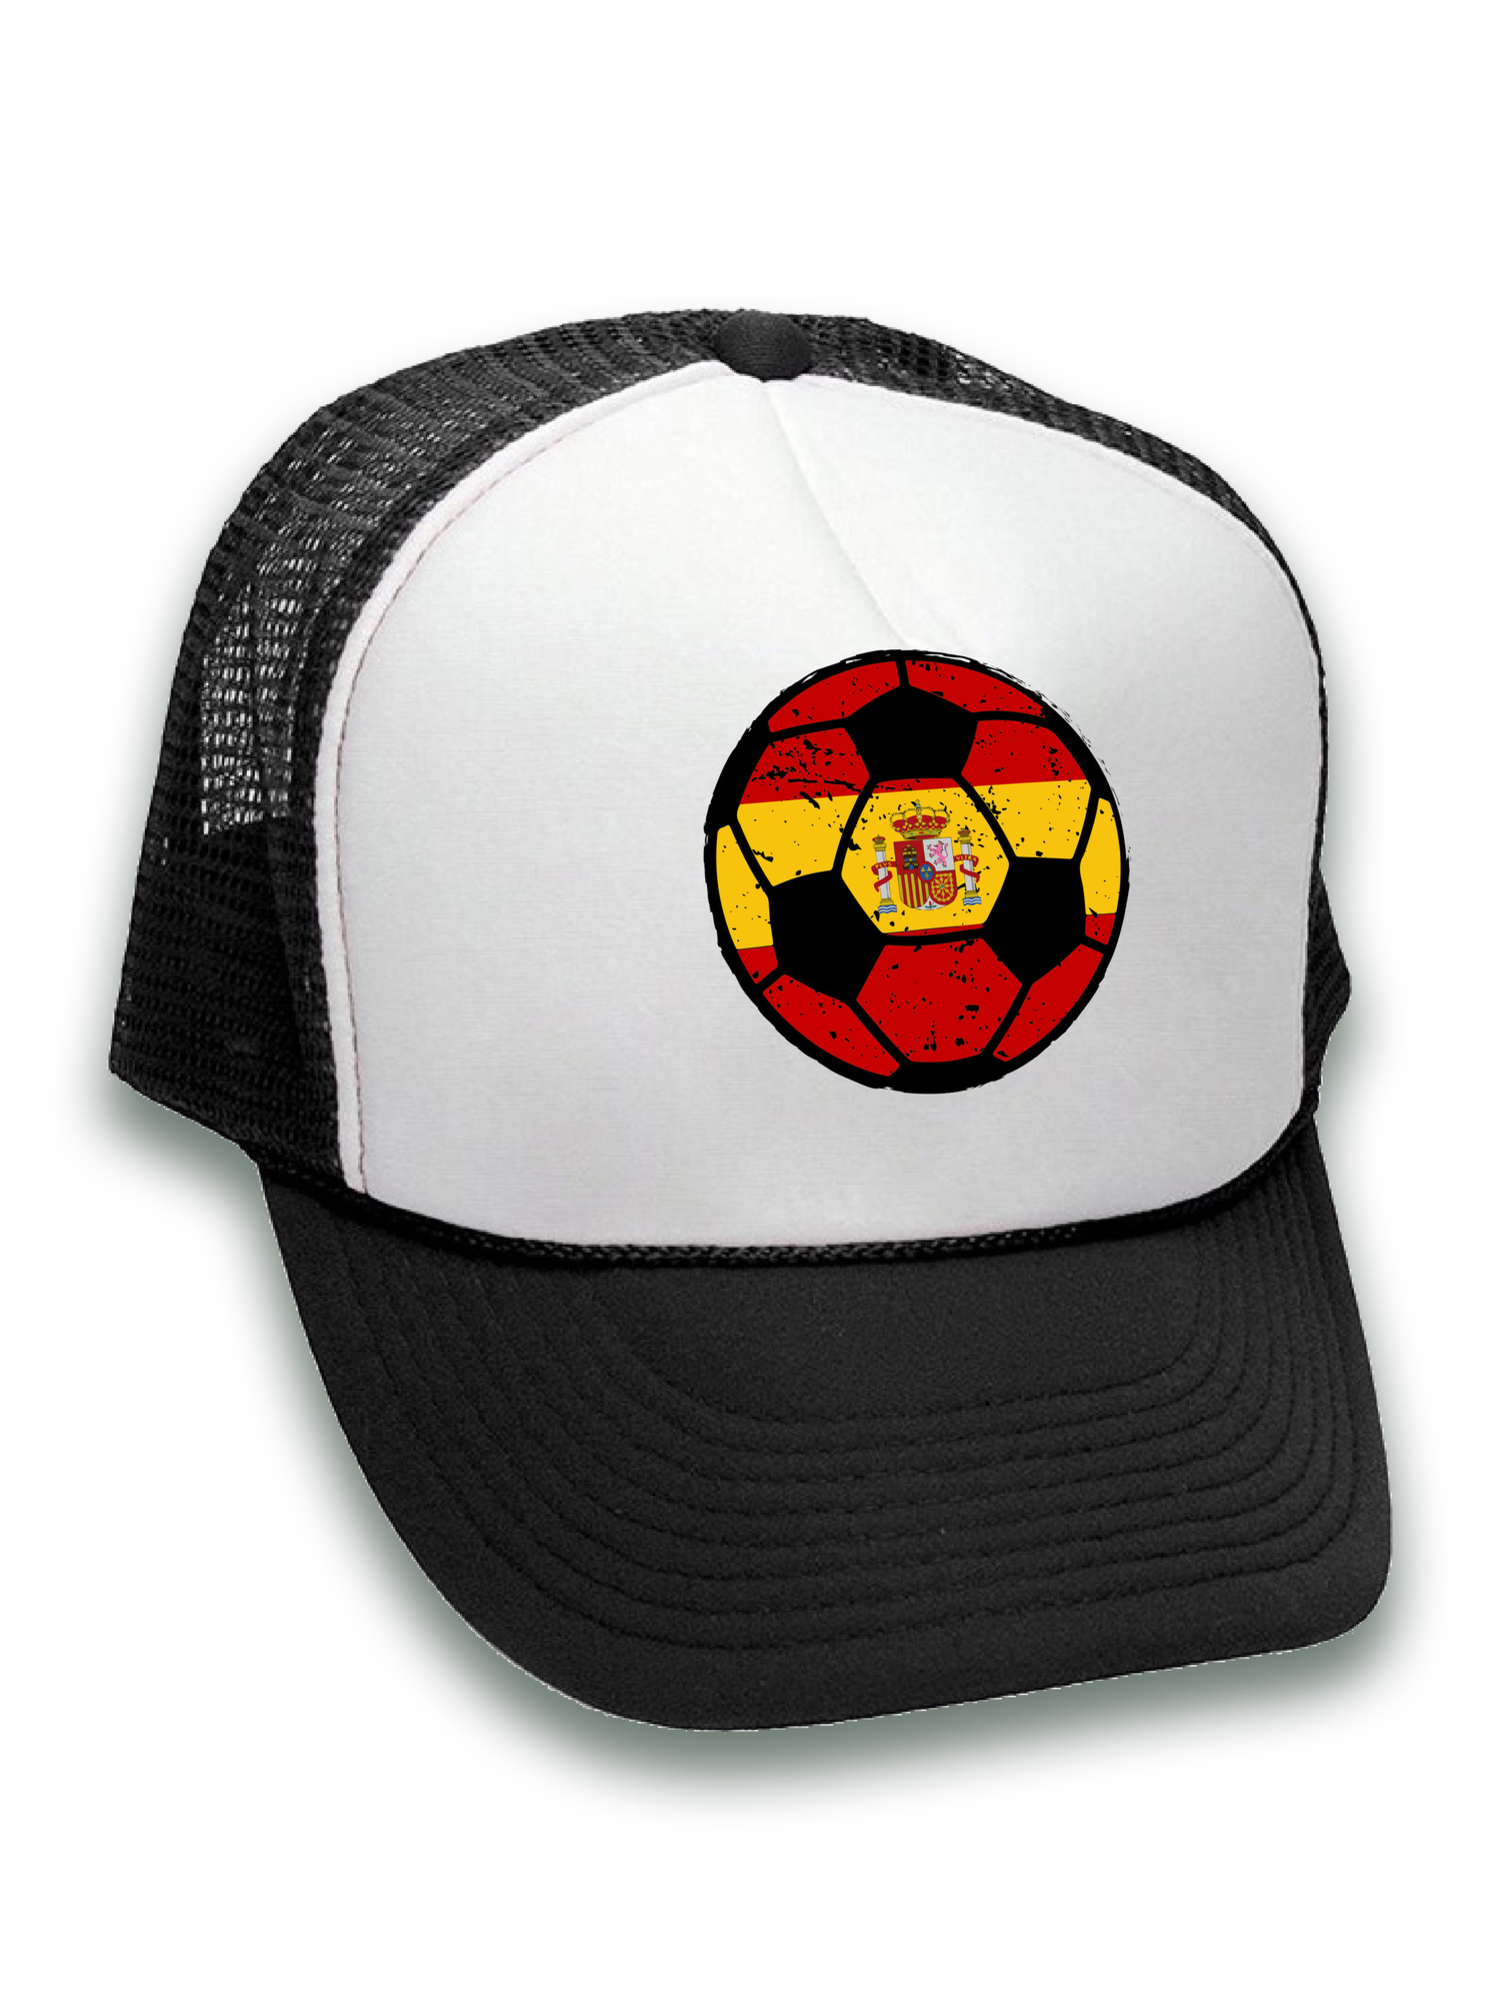 Awkward Styles Spain Soccer Ball Hat Spanish Soccer Trucker Hat Spain 2018 Baseball Cap Spain Trucker Hats for Men and Women Hat Gifts from Spain Spanish Baseball Hats Spanish Flag Trucker Hat - image 2 of 6